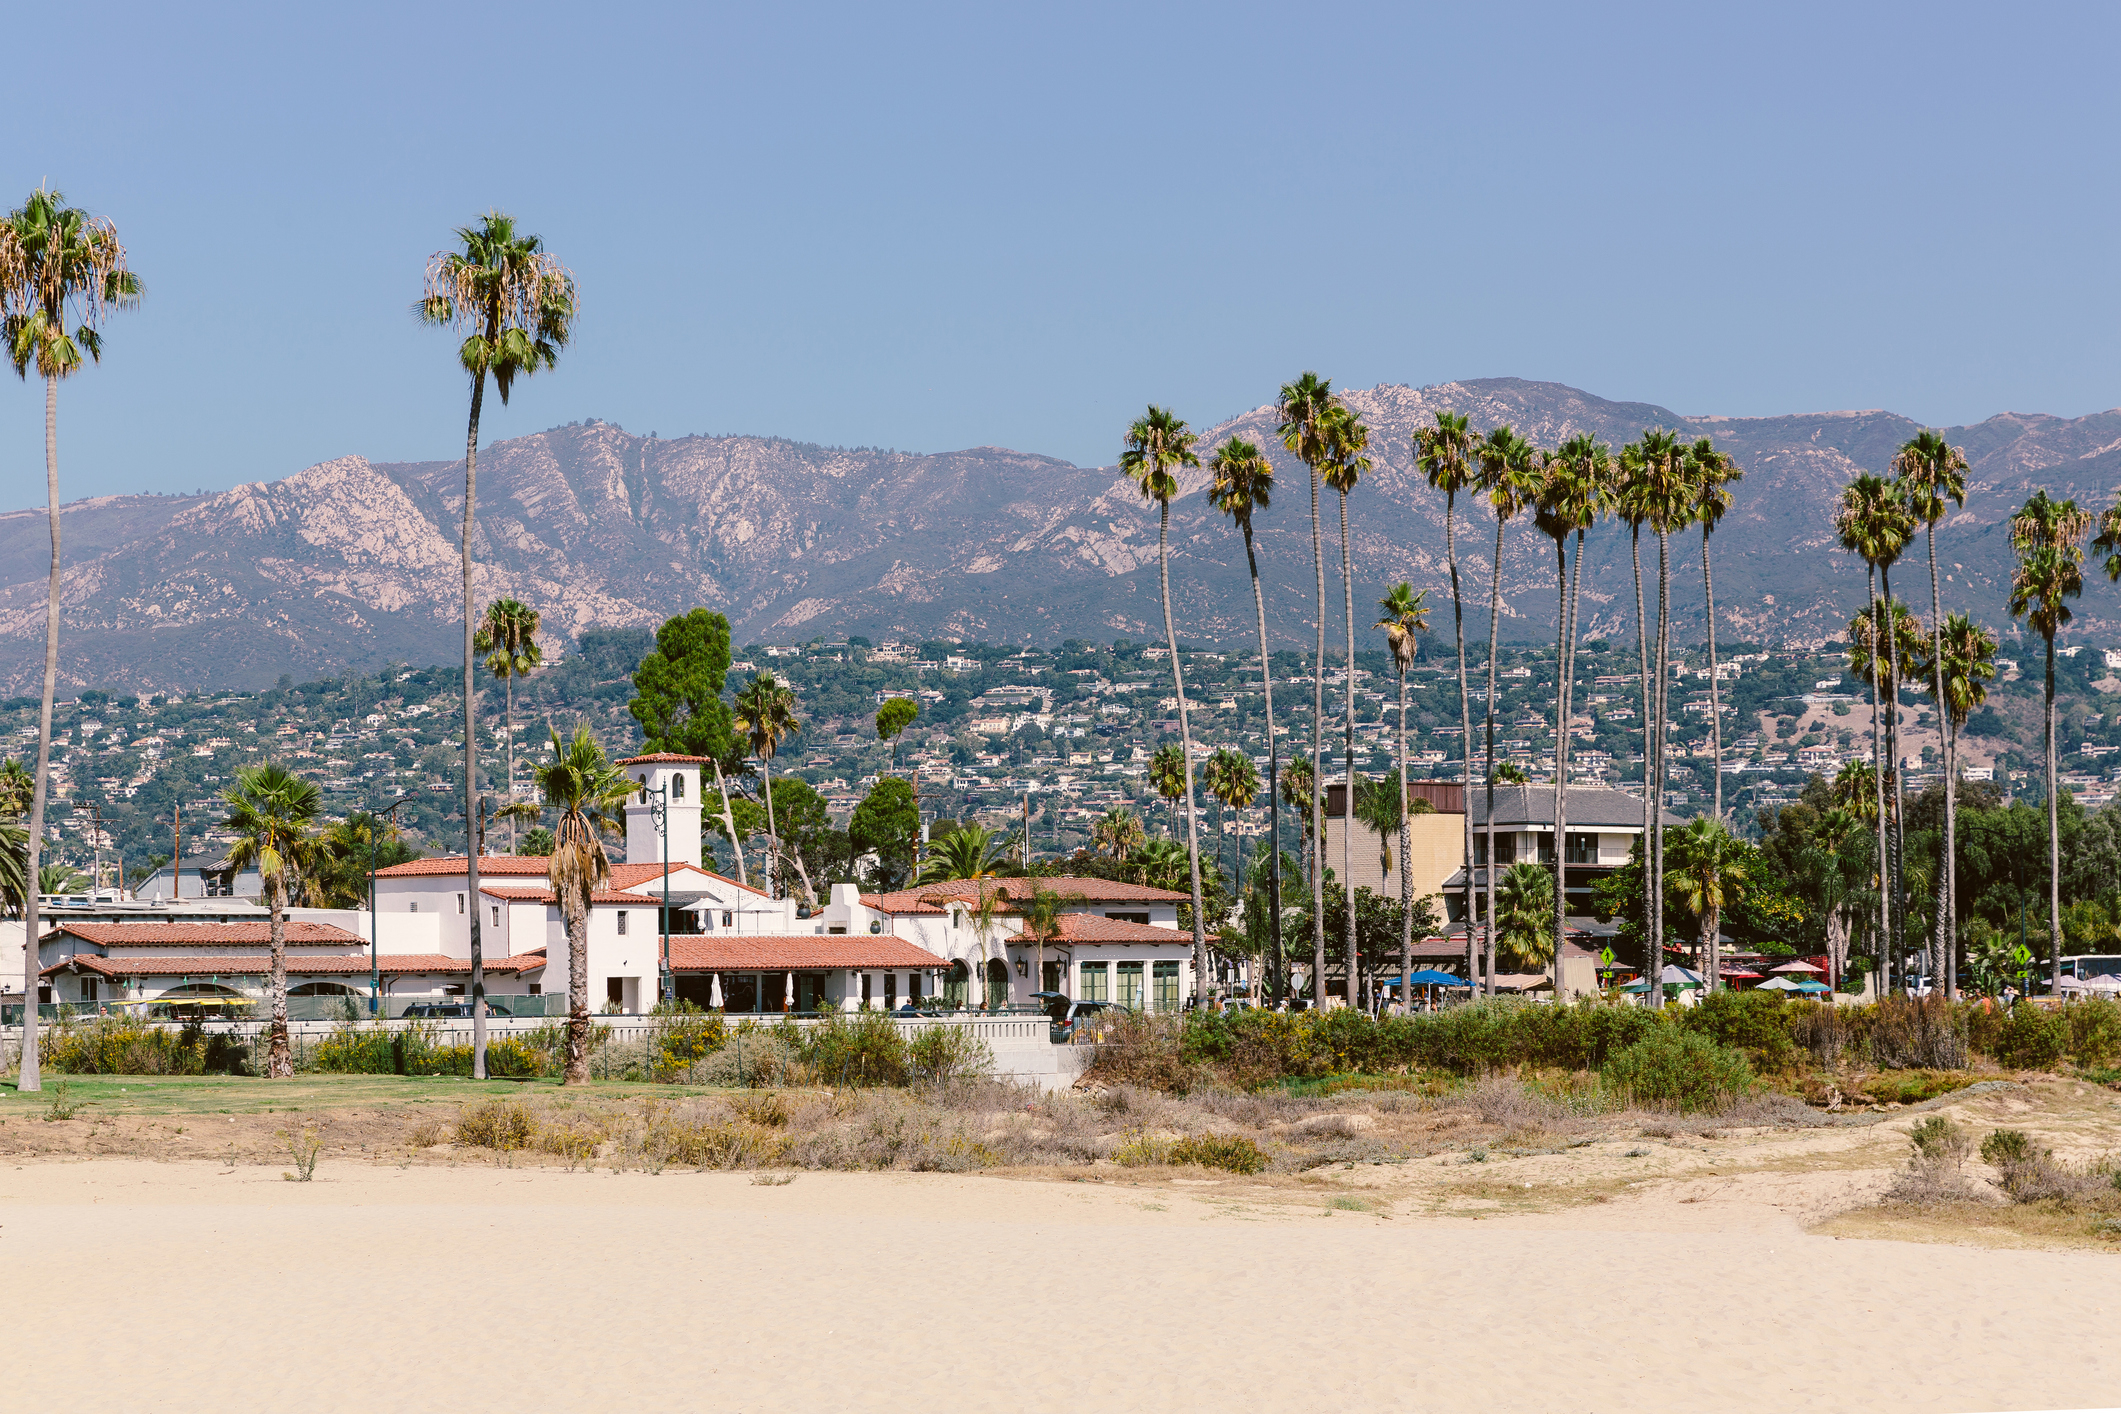 Beachfront view with palm trees and mountain background, with a modern building in the center